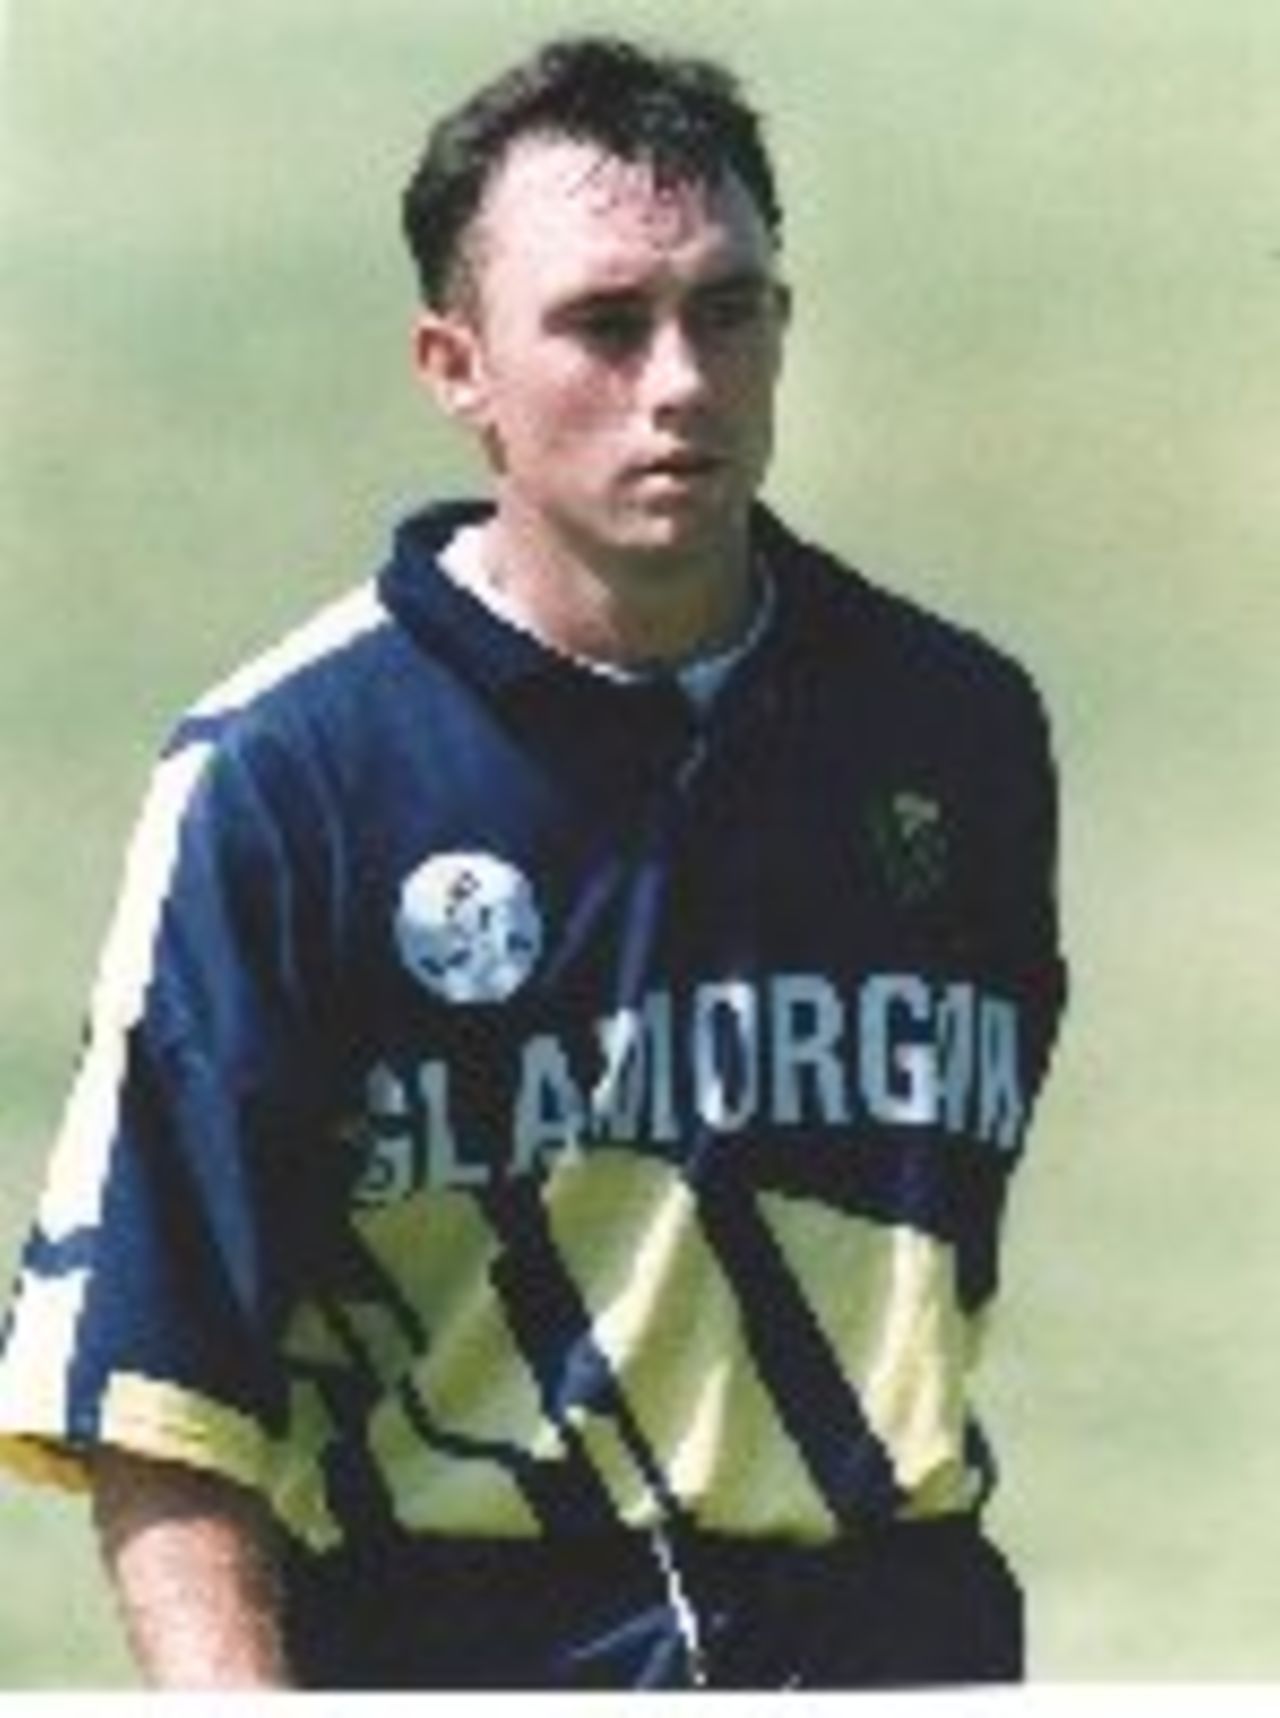 Adrian Dale - in Glamorgan's Sunday league kit for 1993